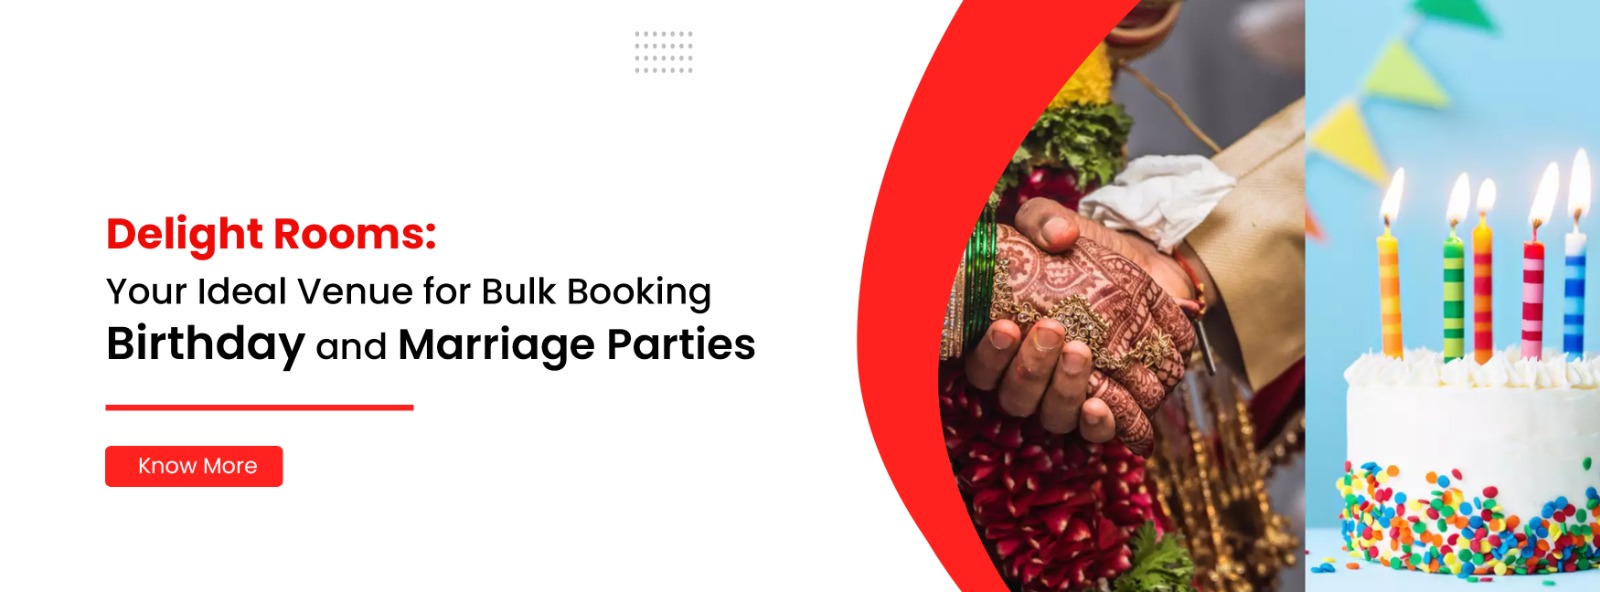 Delight Rooms: Your Ideal Venue for Bulk Booking Birthday and Marriage Parties